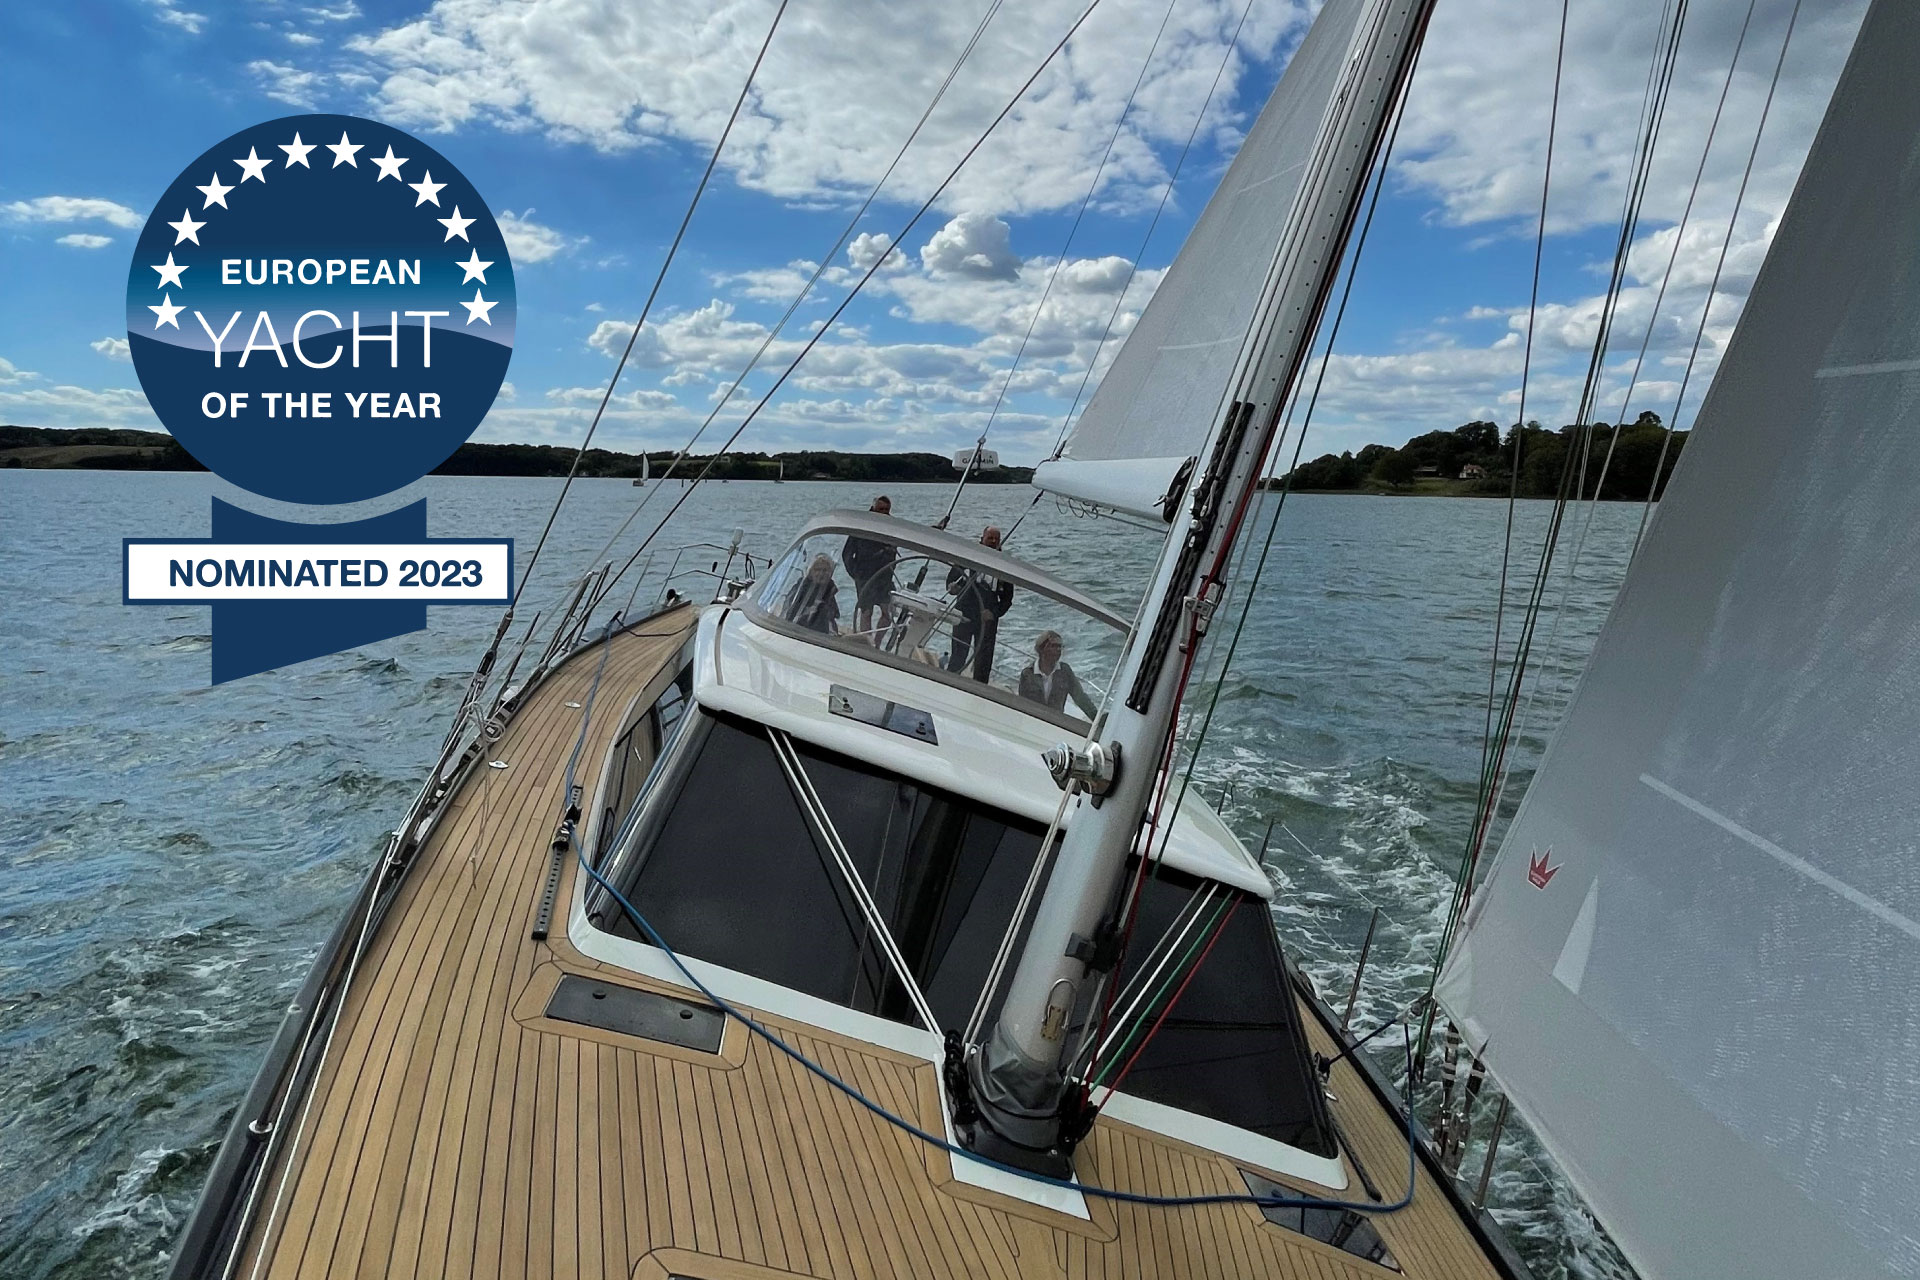 Nordship 500 DS nominated for European Yacht of the Year